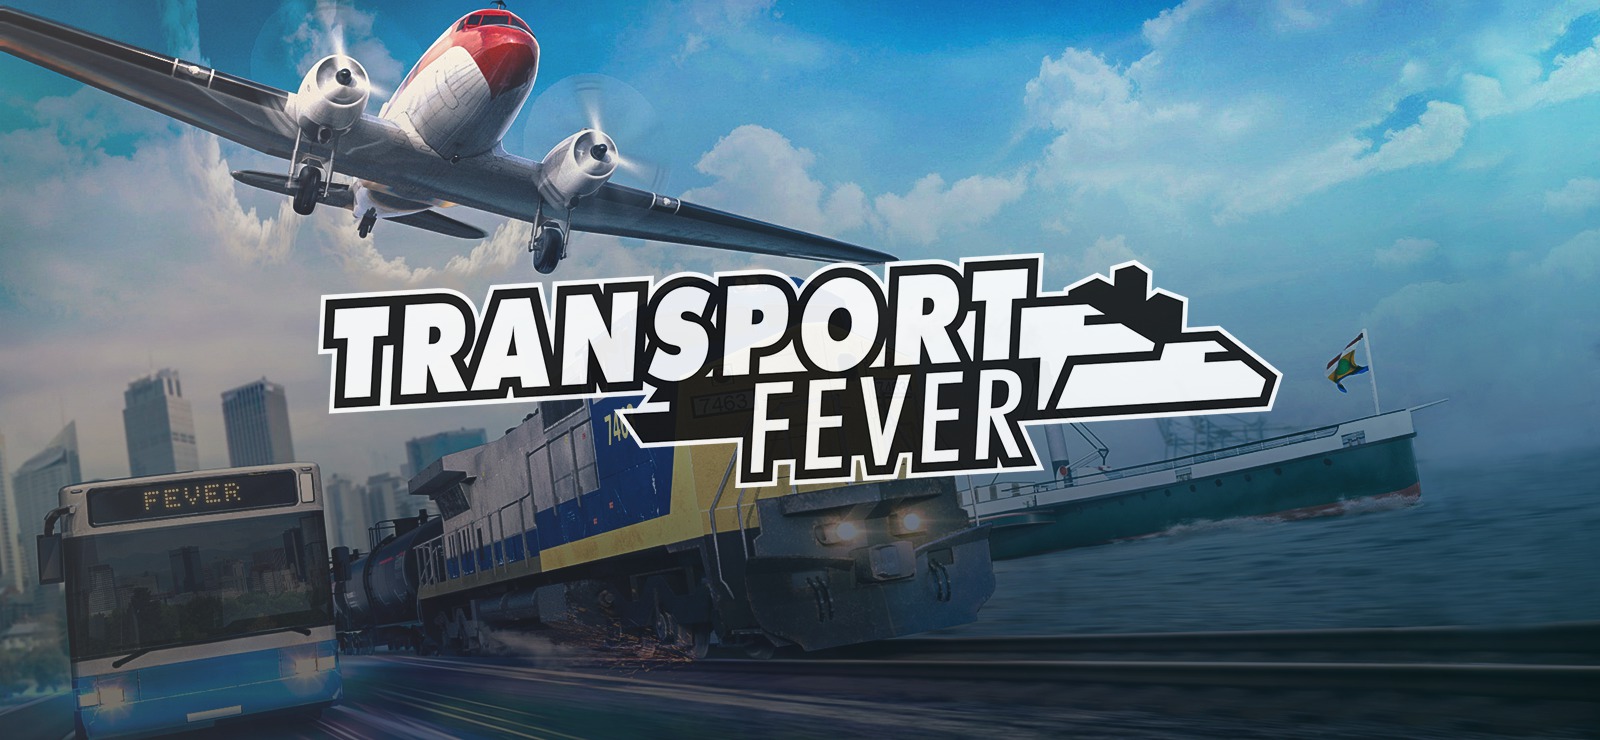 Transport Fever Backgrounds, Compatible - PC, Mobile, Gadgets| 1600x740 px